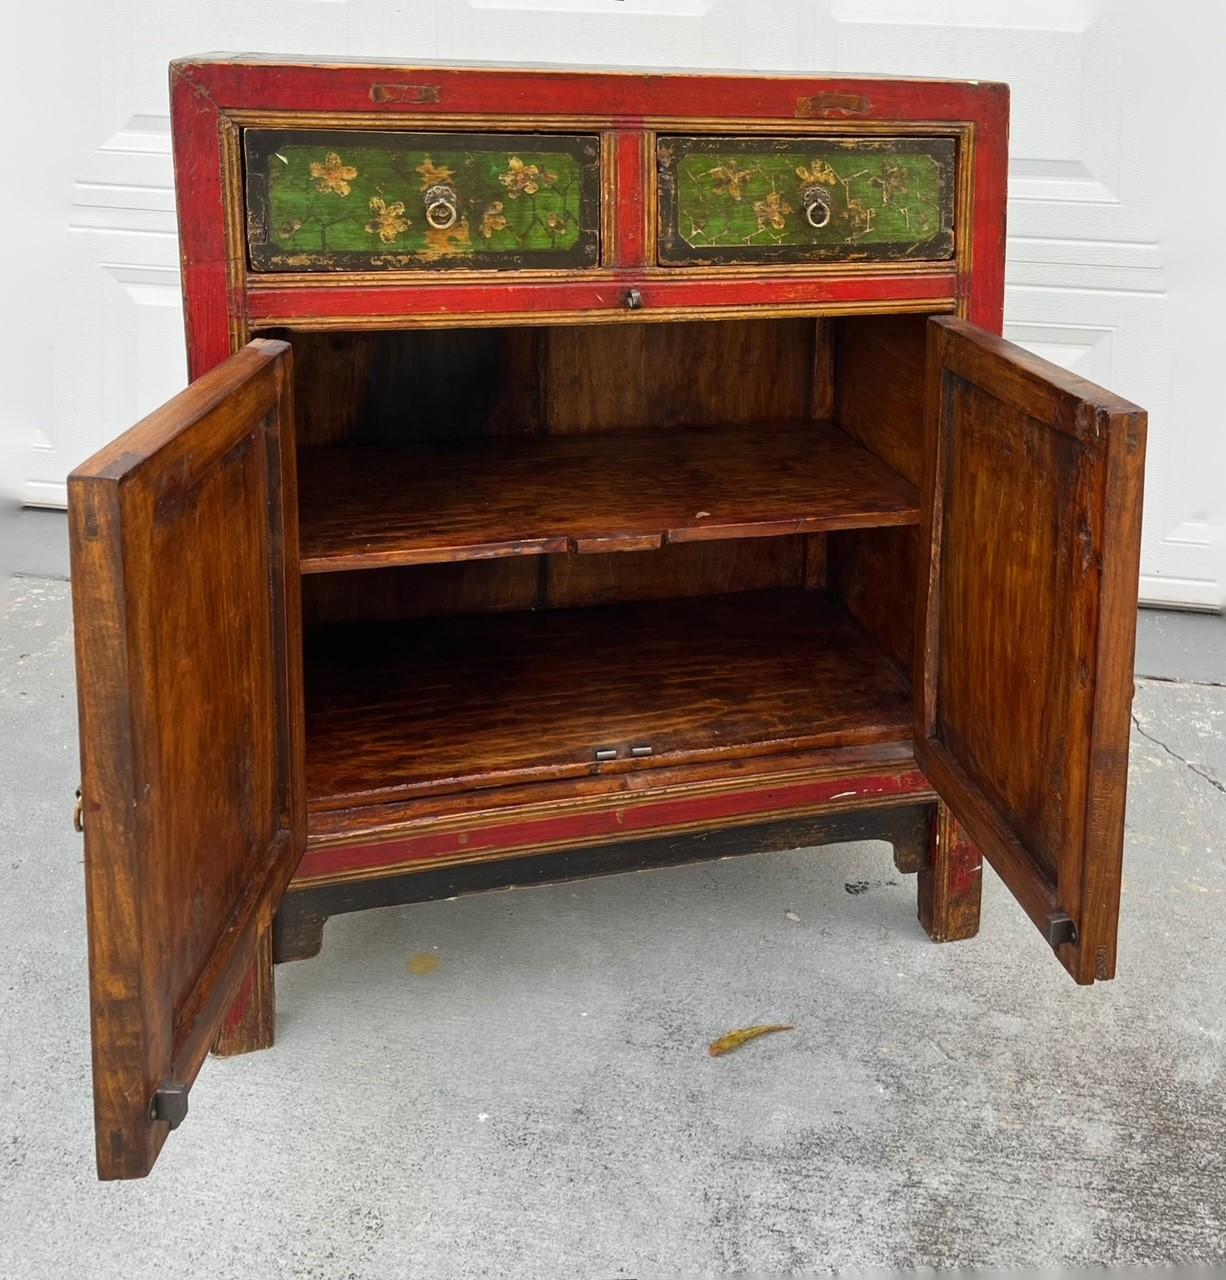 Chinese Painted Vintage Elm Hall Cabinet.

Wonderful vintage Chinese hand painted cabinet in solid Elmwood with original antique finish. With two front drawers and two doors, it holds significance in authentic design. The cabinet is made using